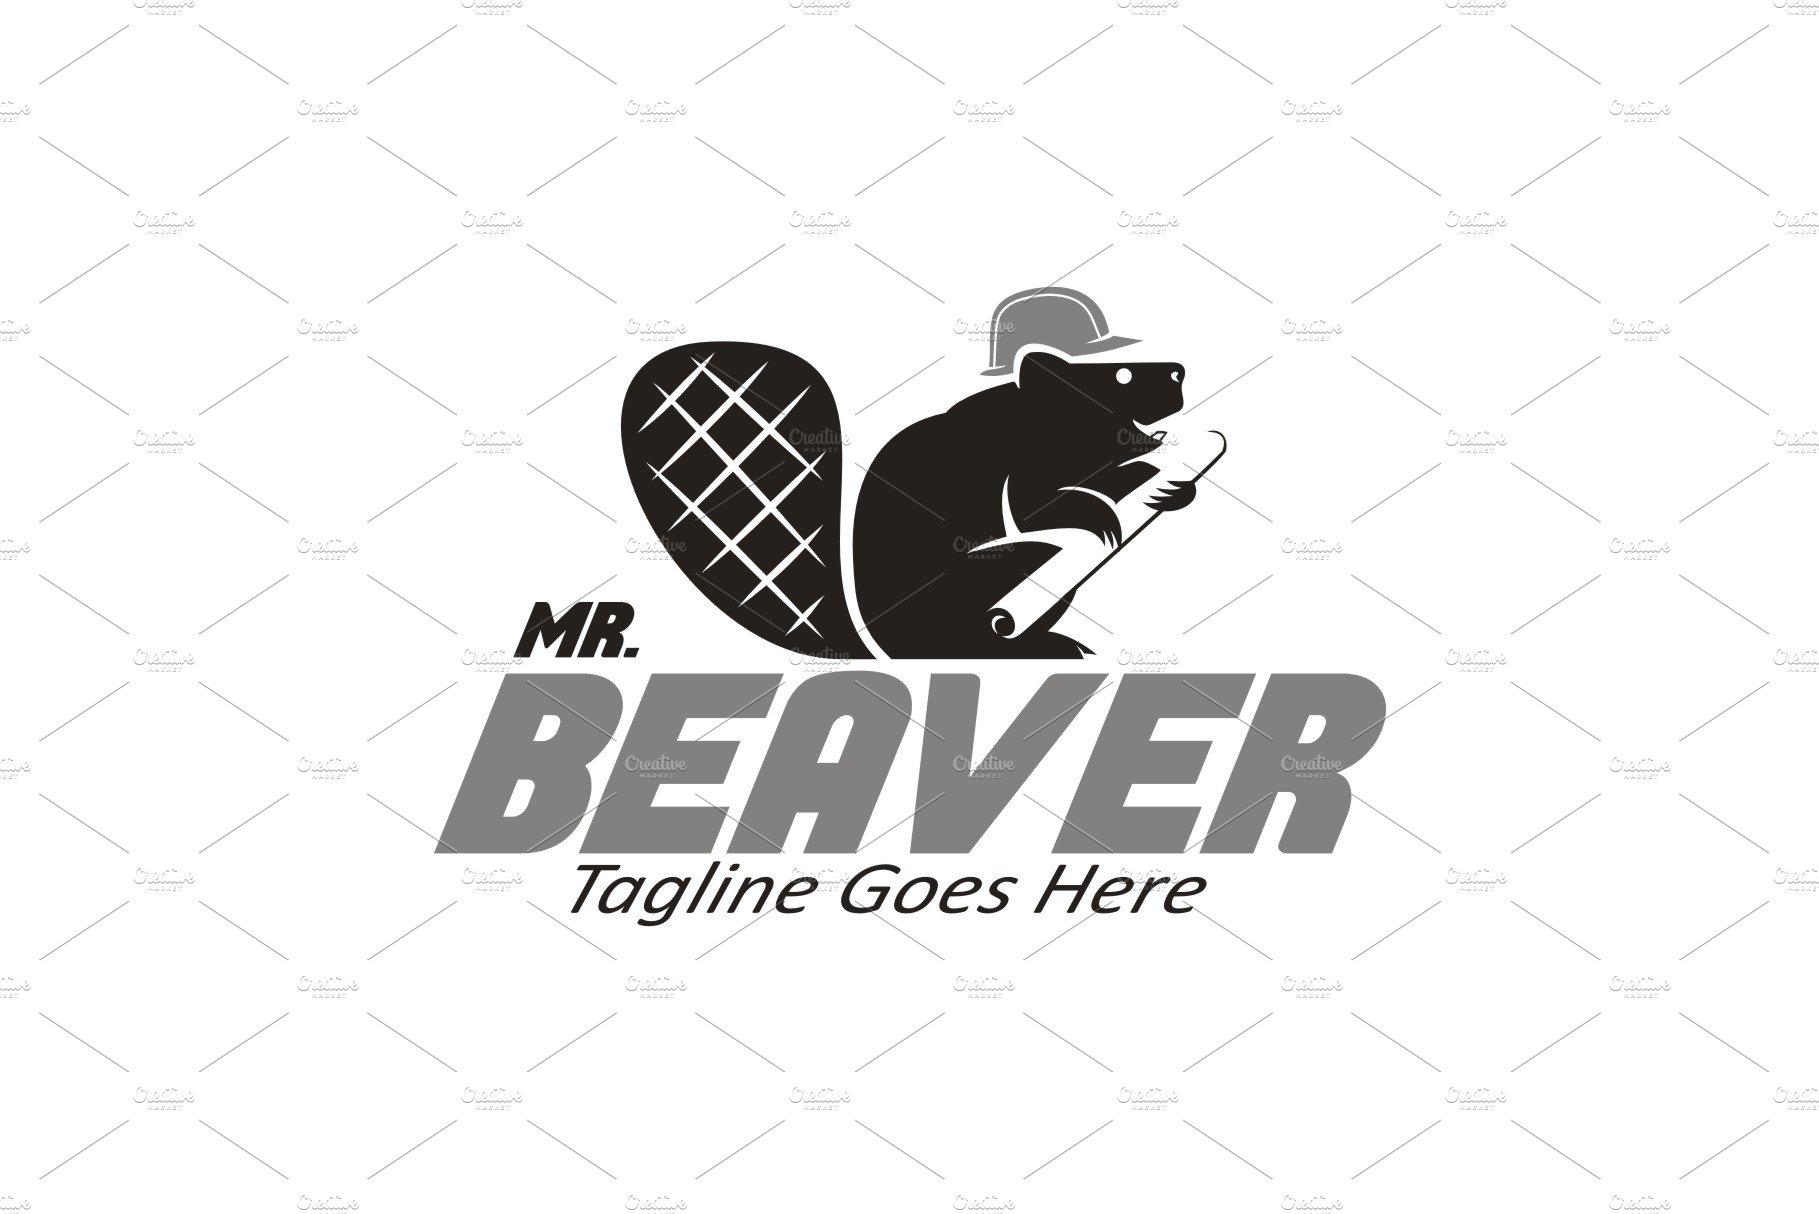 Mr. Beaver preview image.